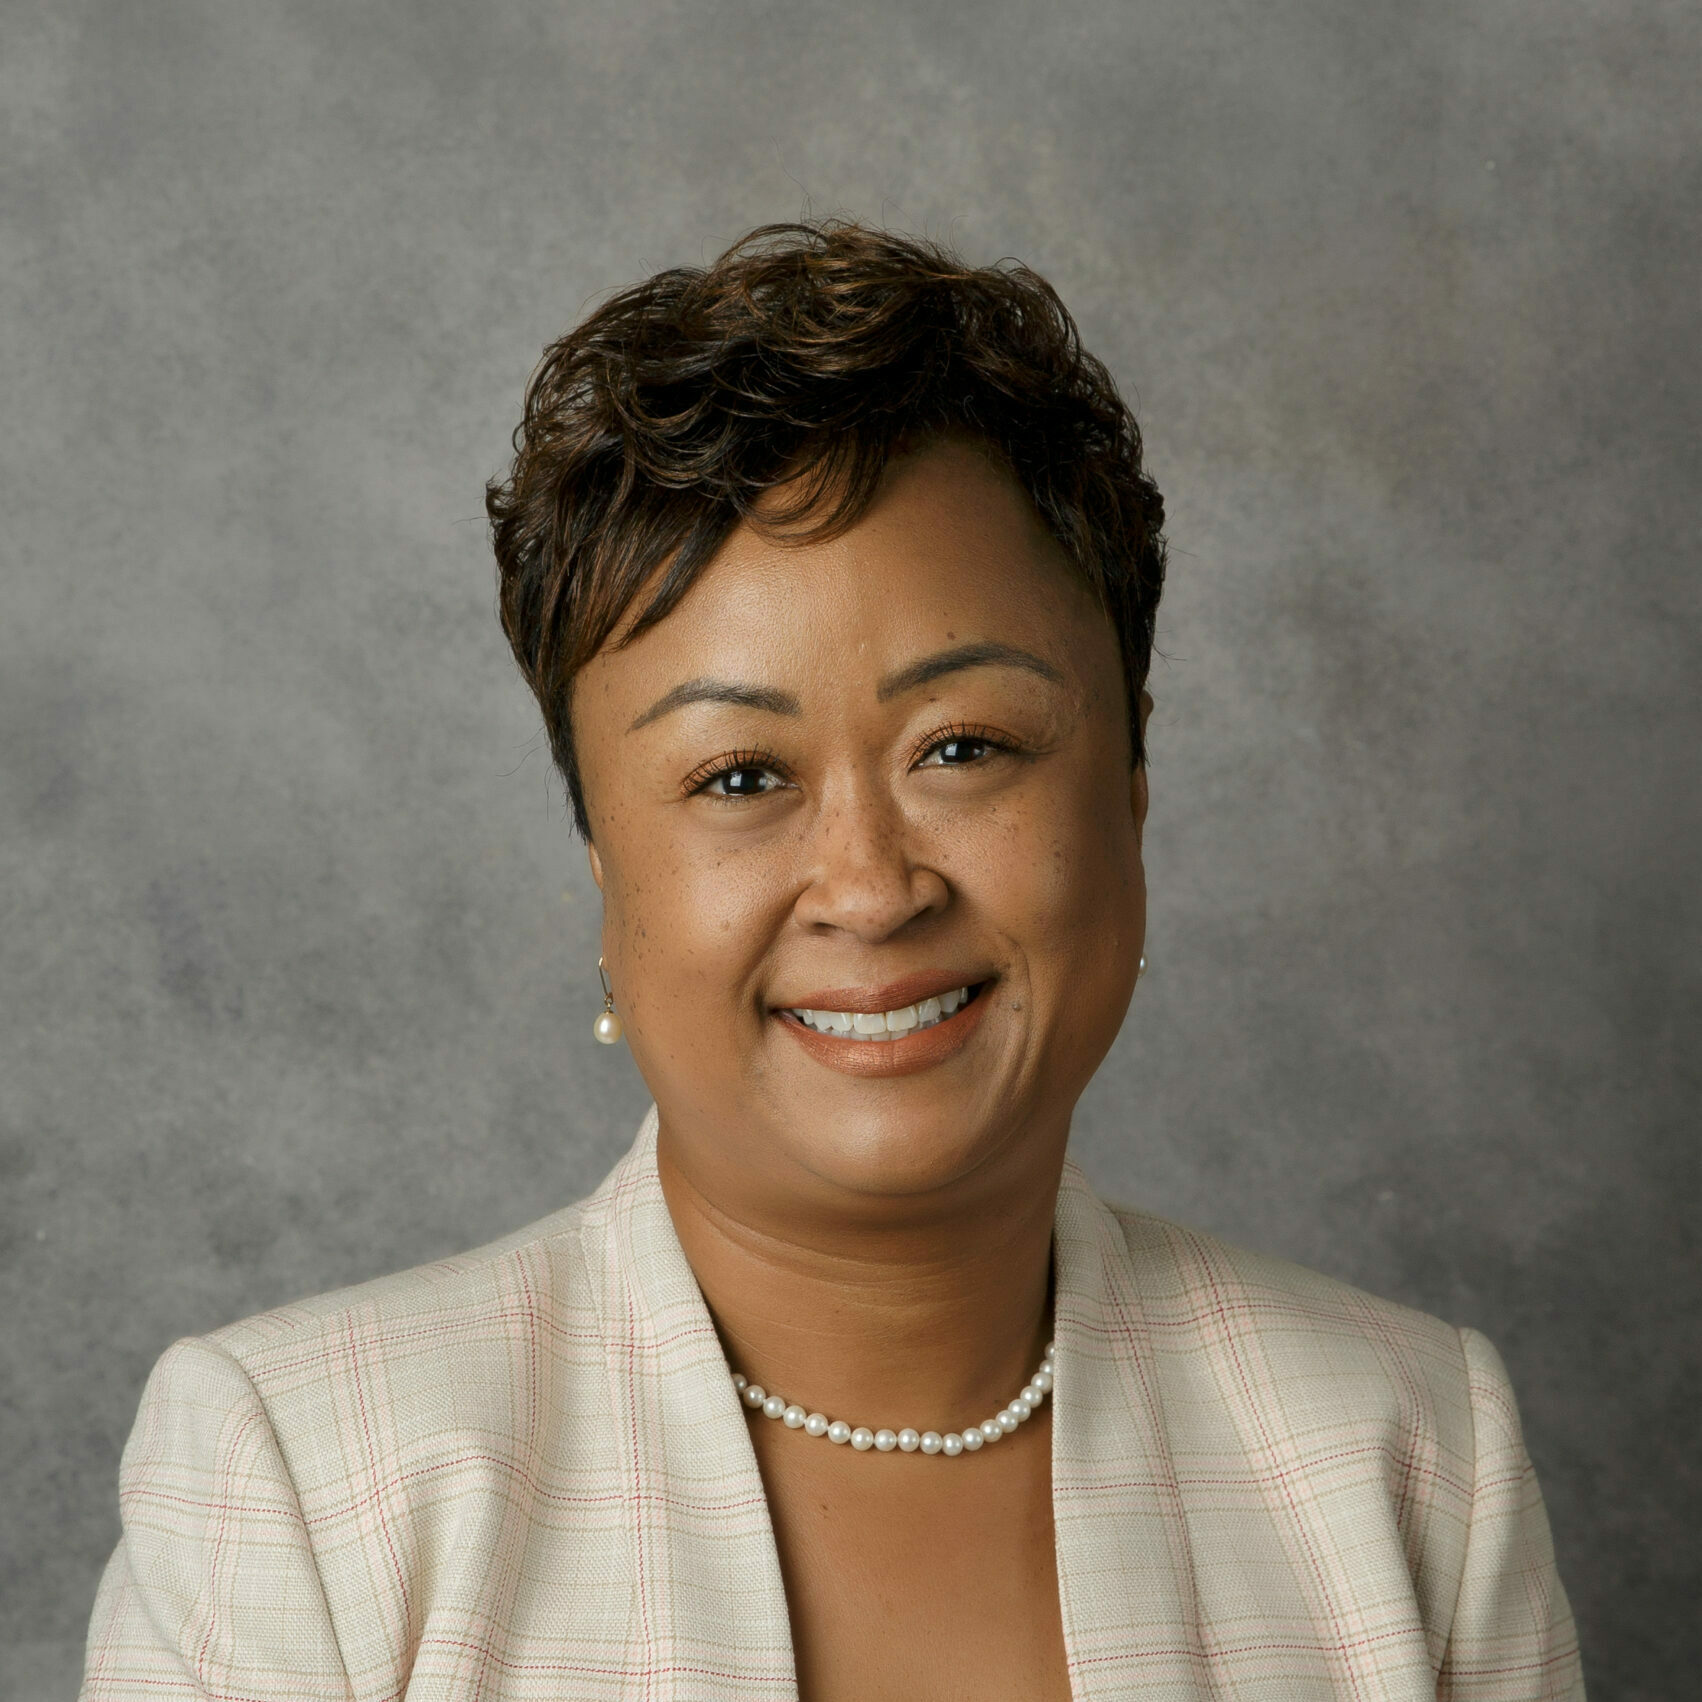 Board member Holly Fields is pictured